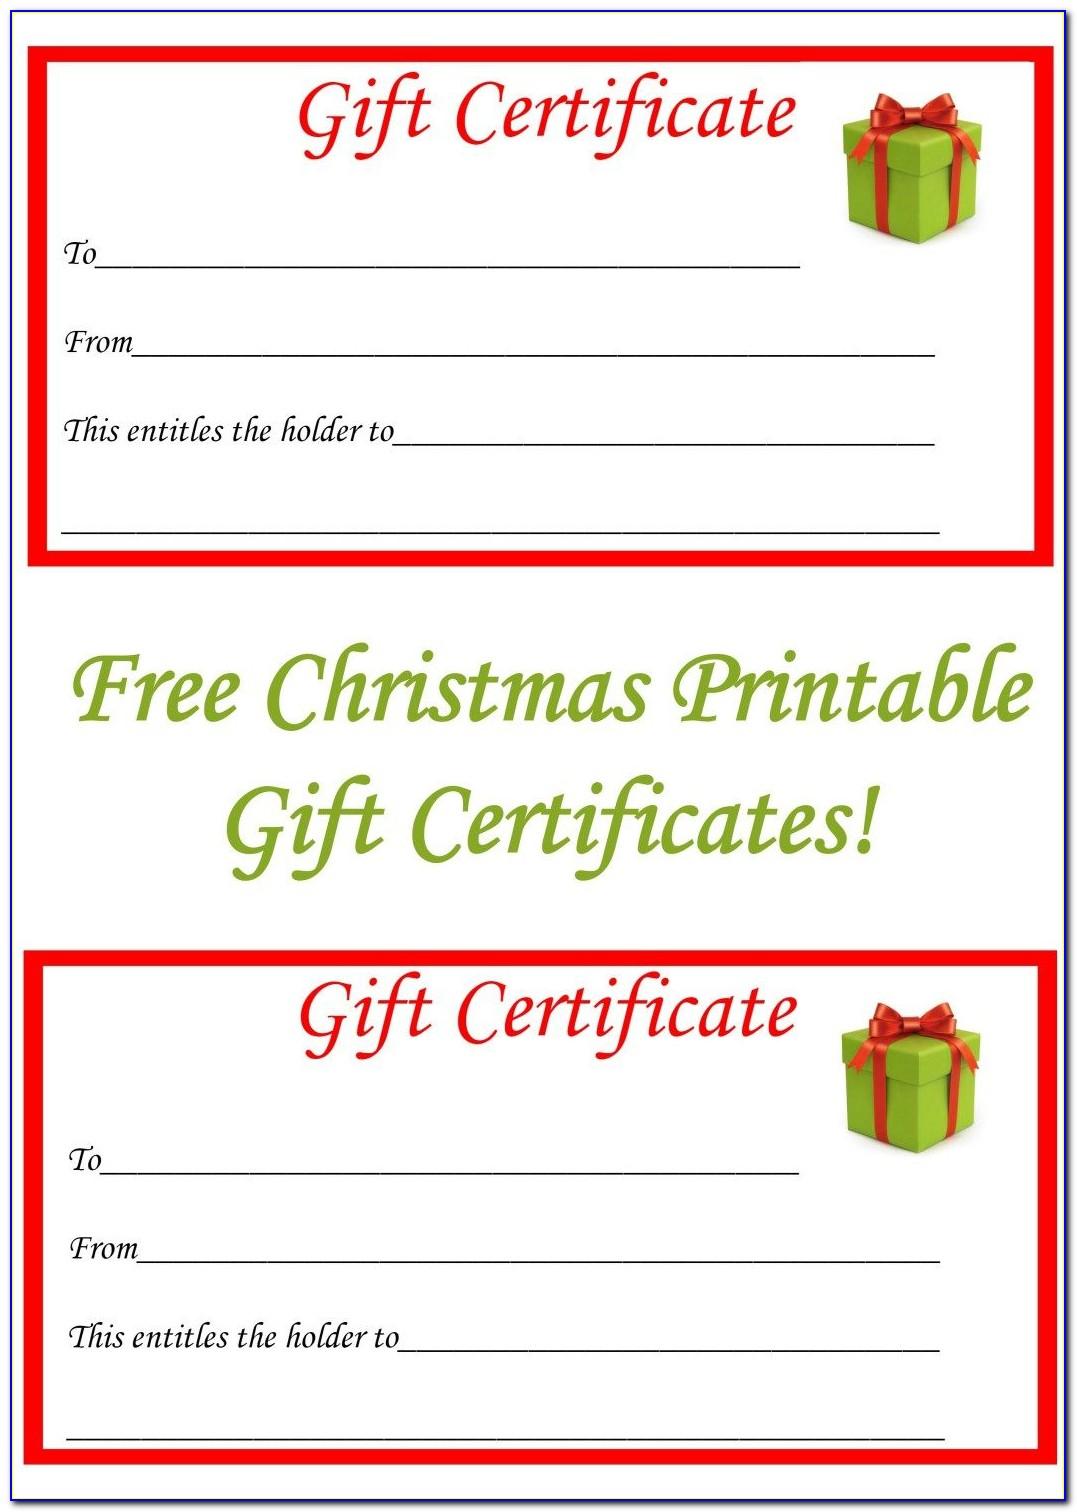 Downloadable Gift Certificate Templates